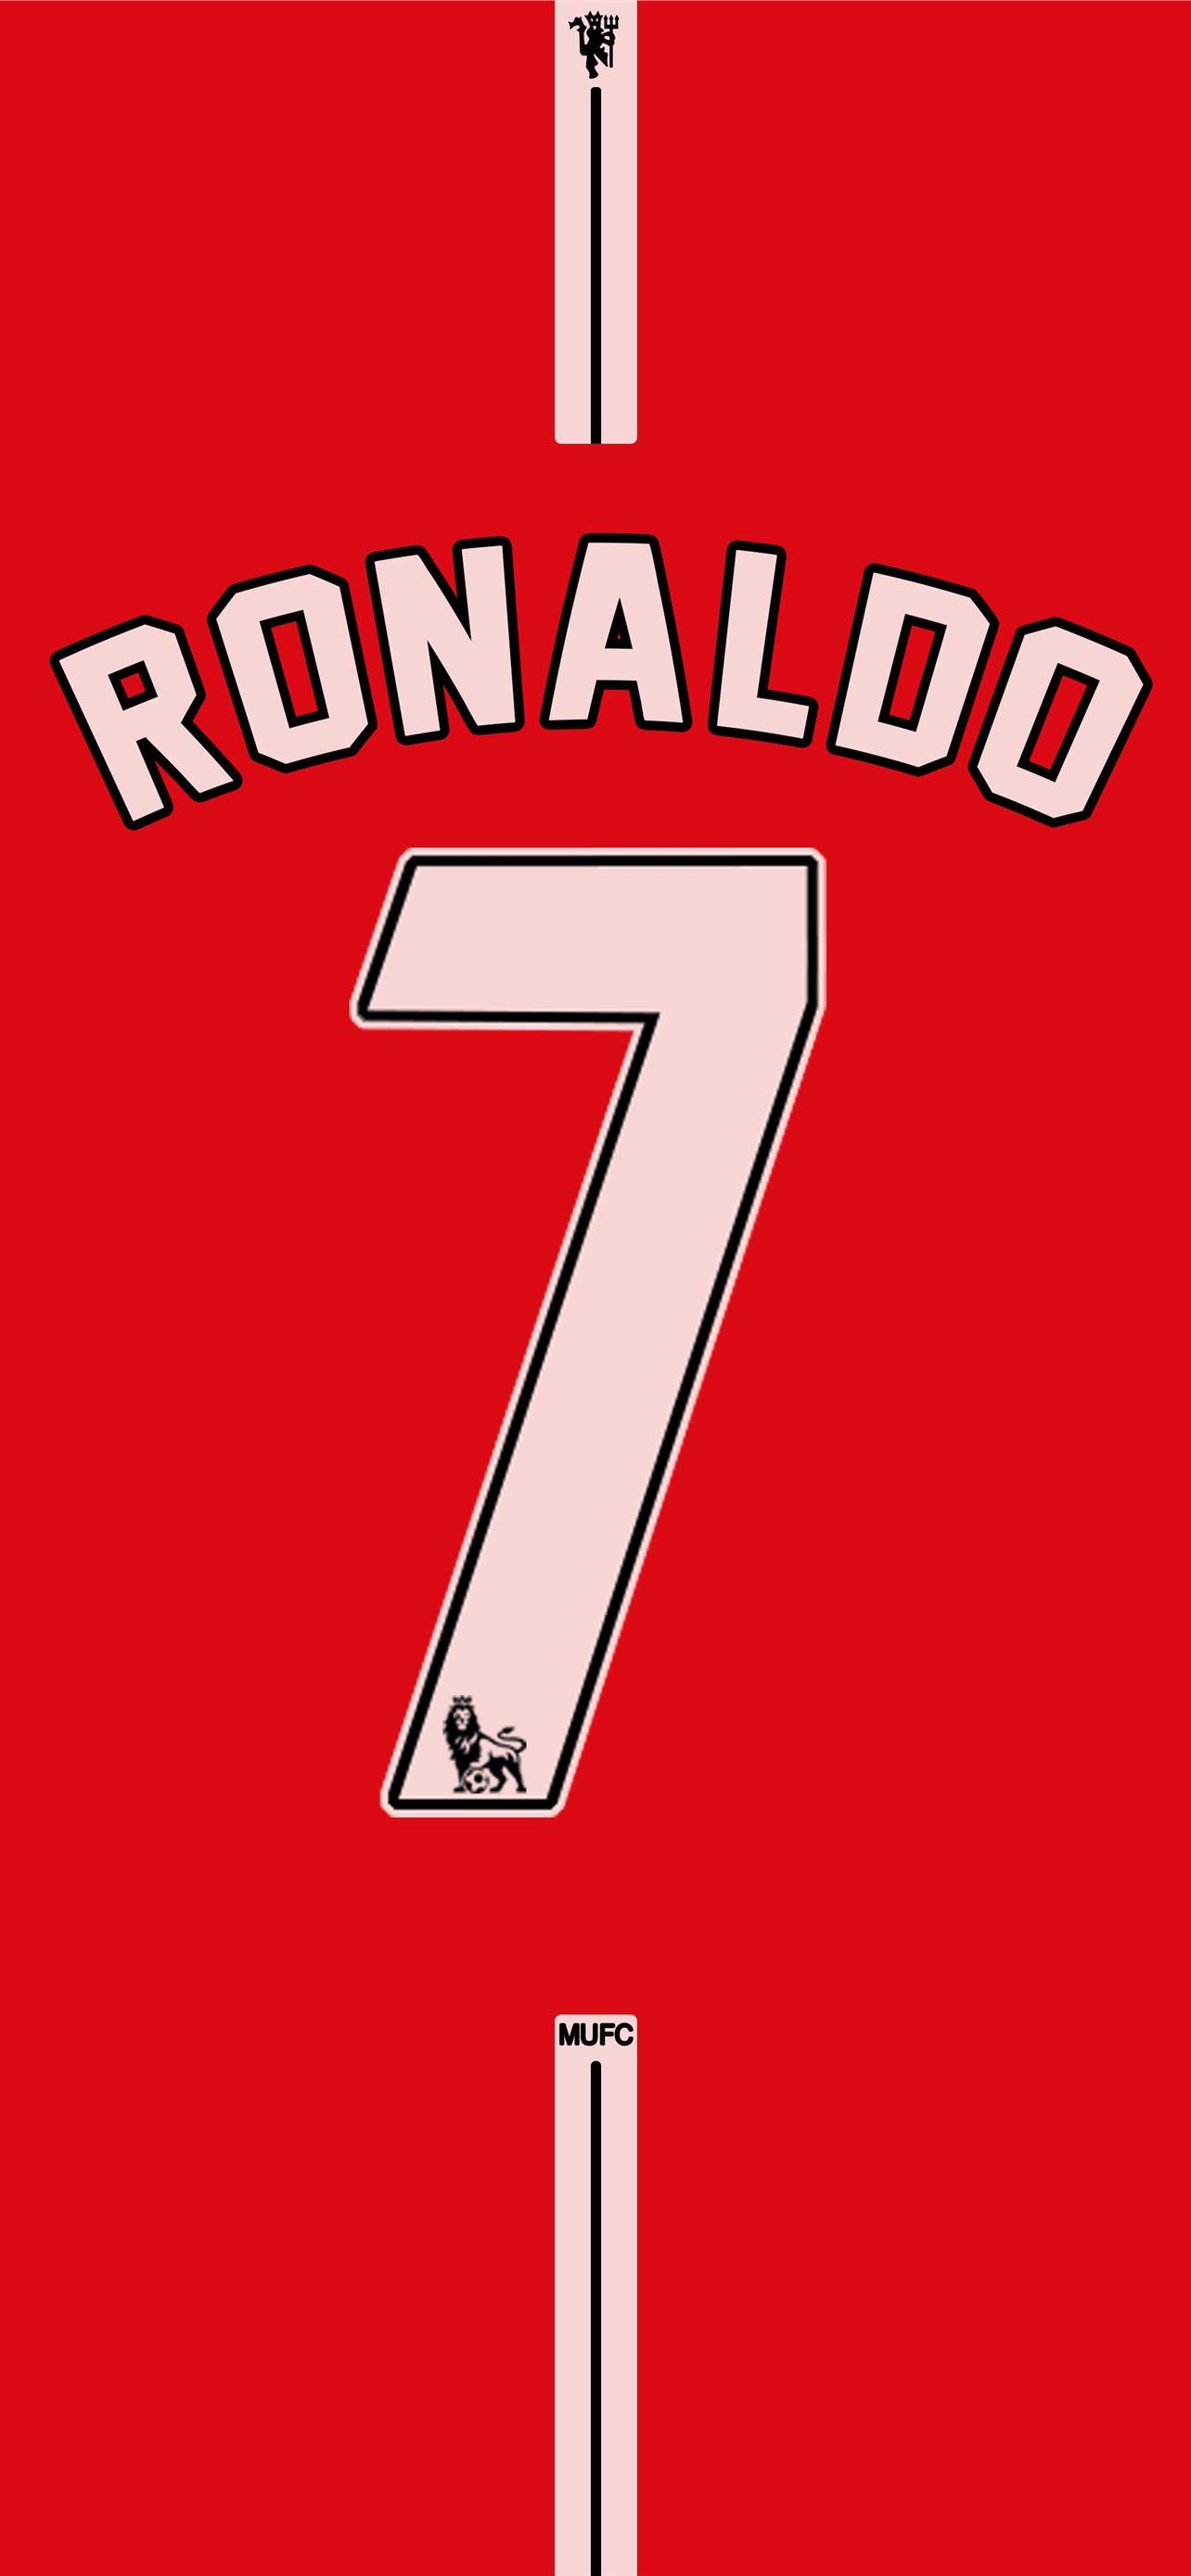 Ronaldo Manchester United 2007 08 Kit iPhone Wallpapers Free Download